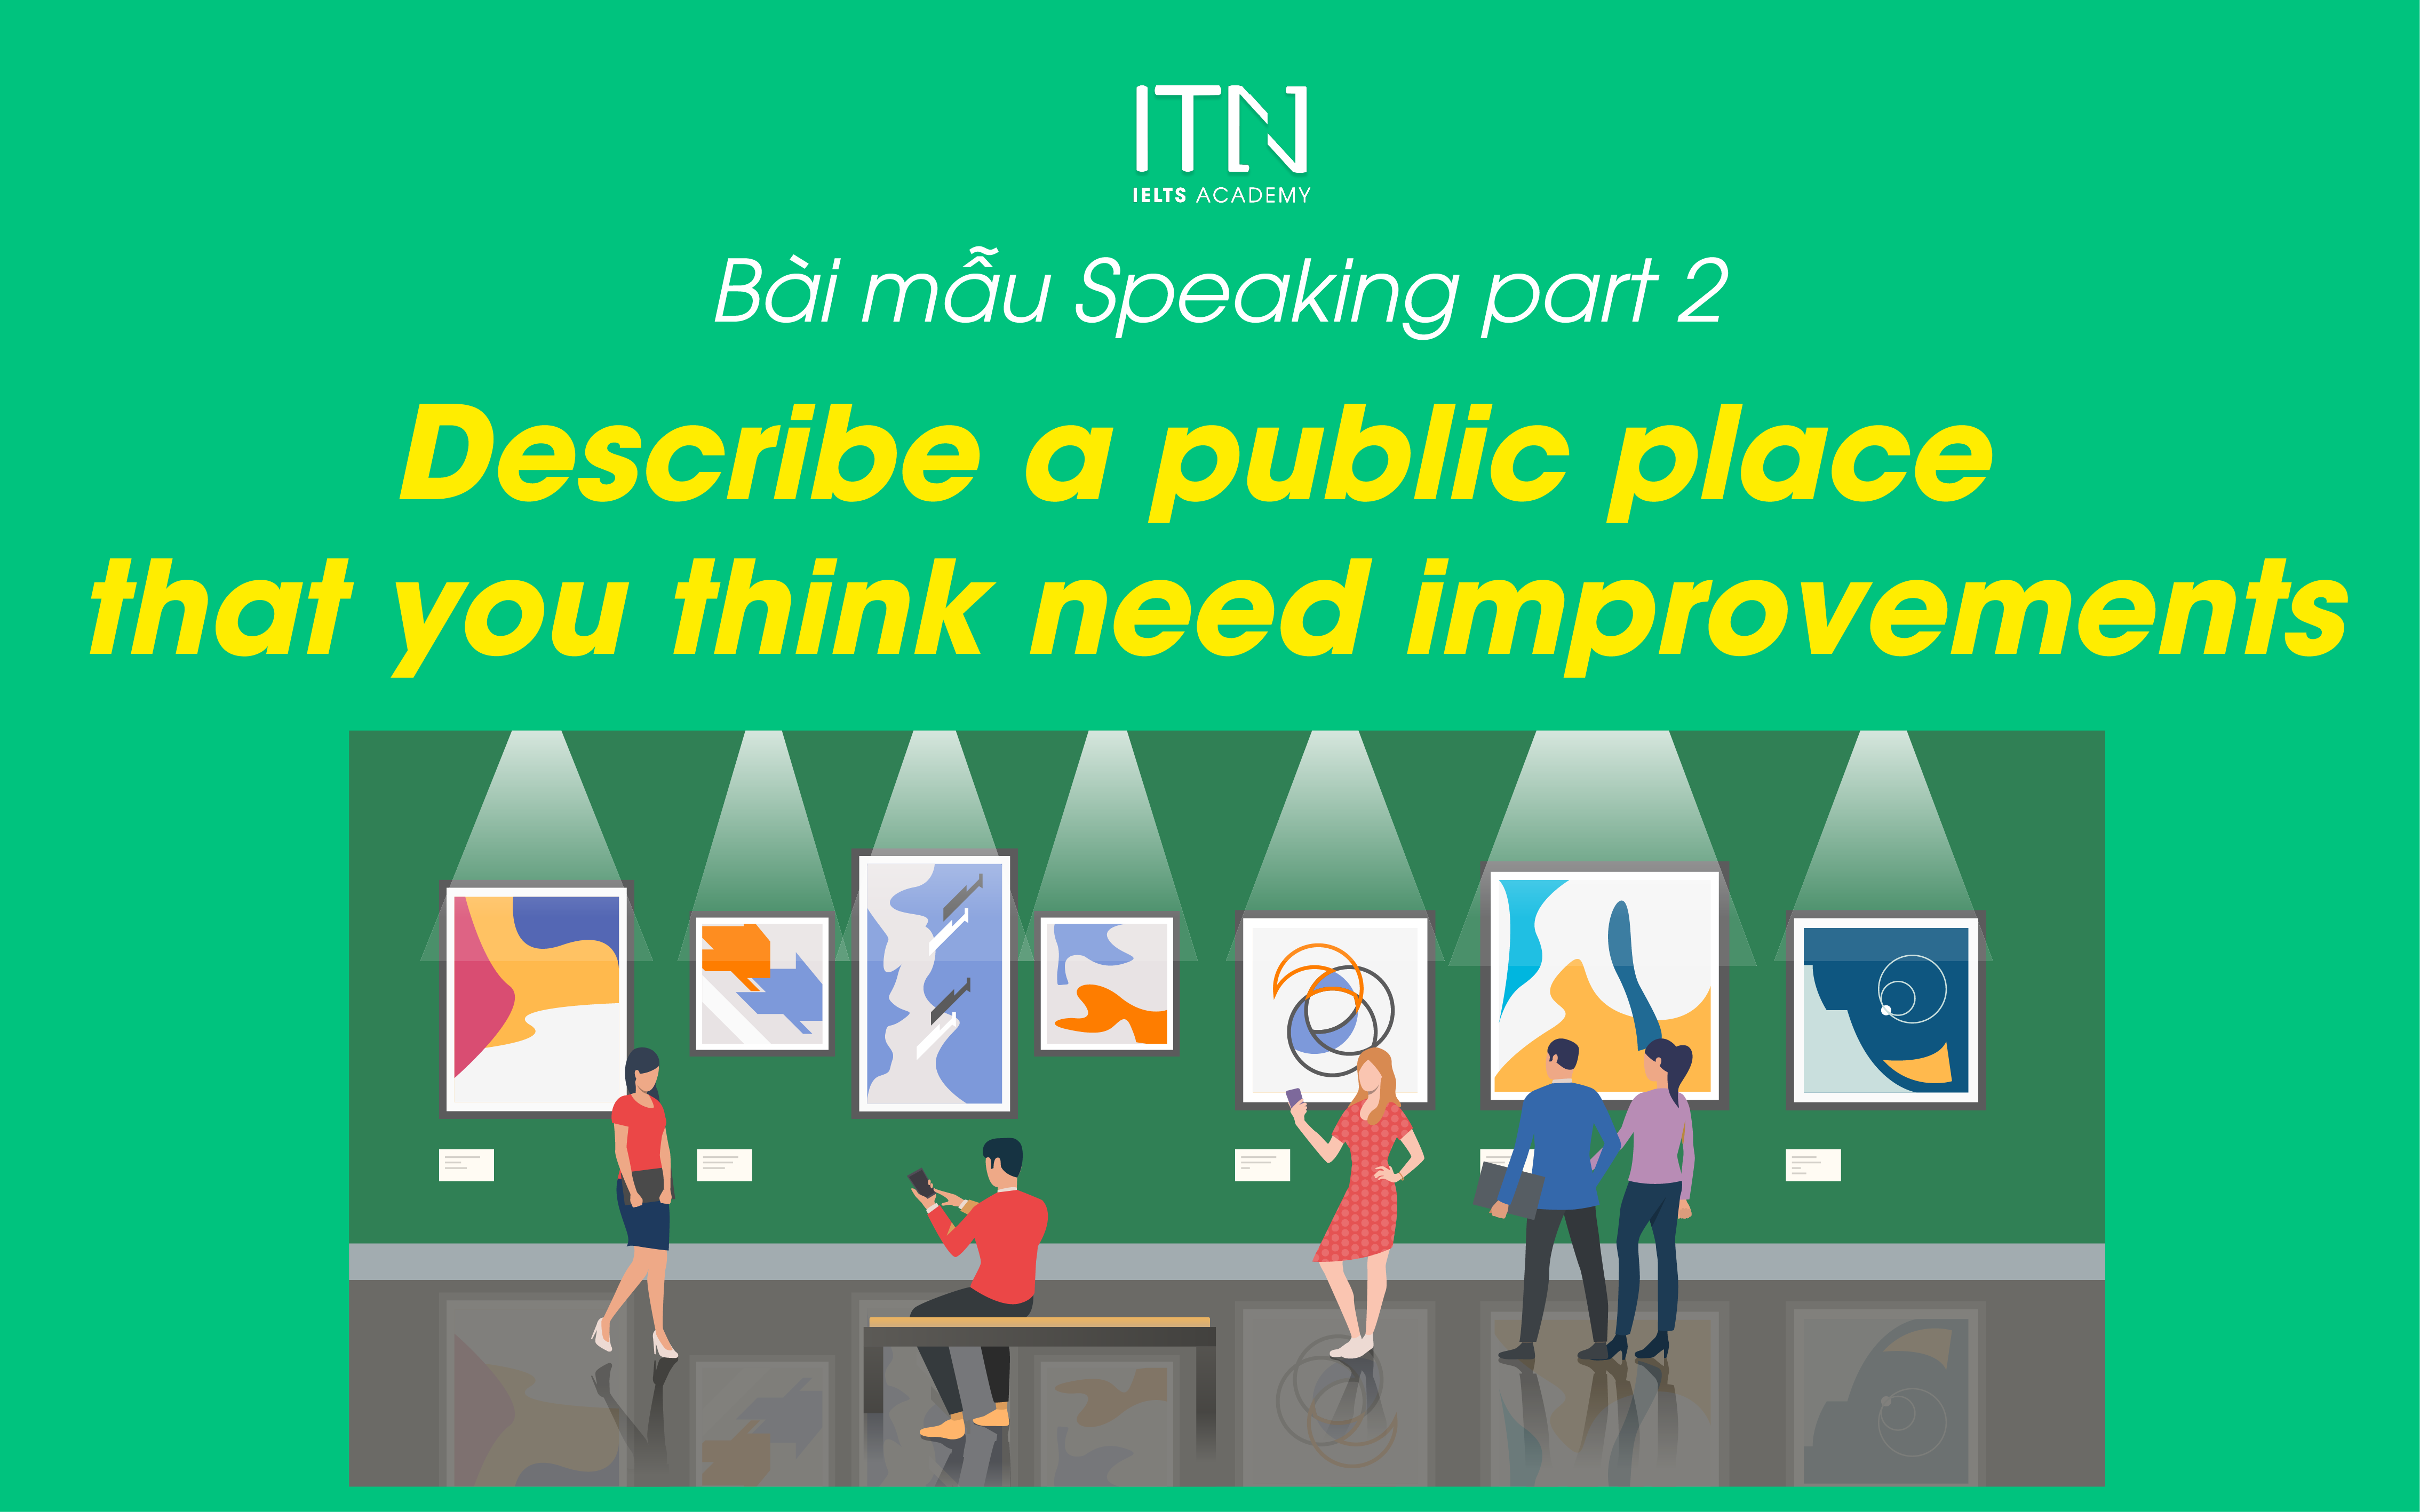 Describe A Public Place That You Think Need Improvements - Bài Mẫu Speaking Part 2